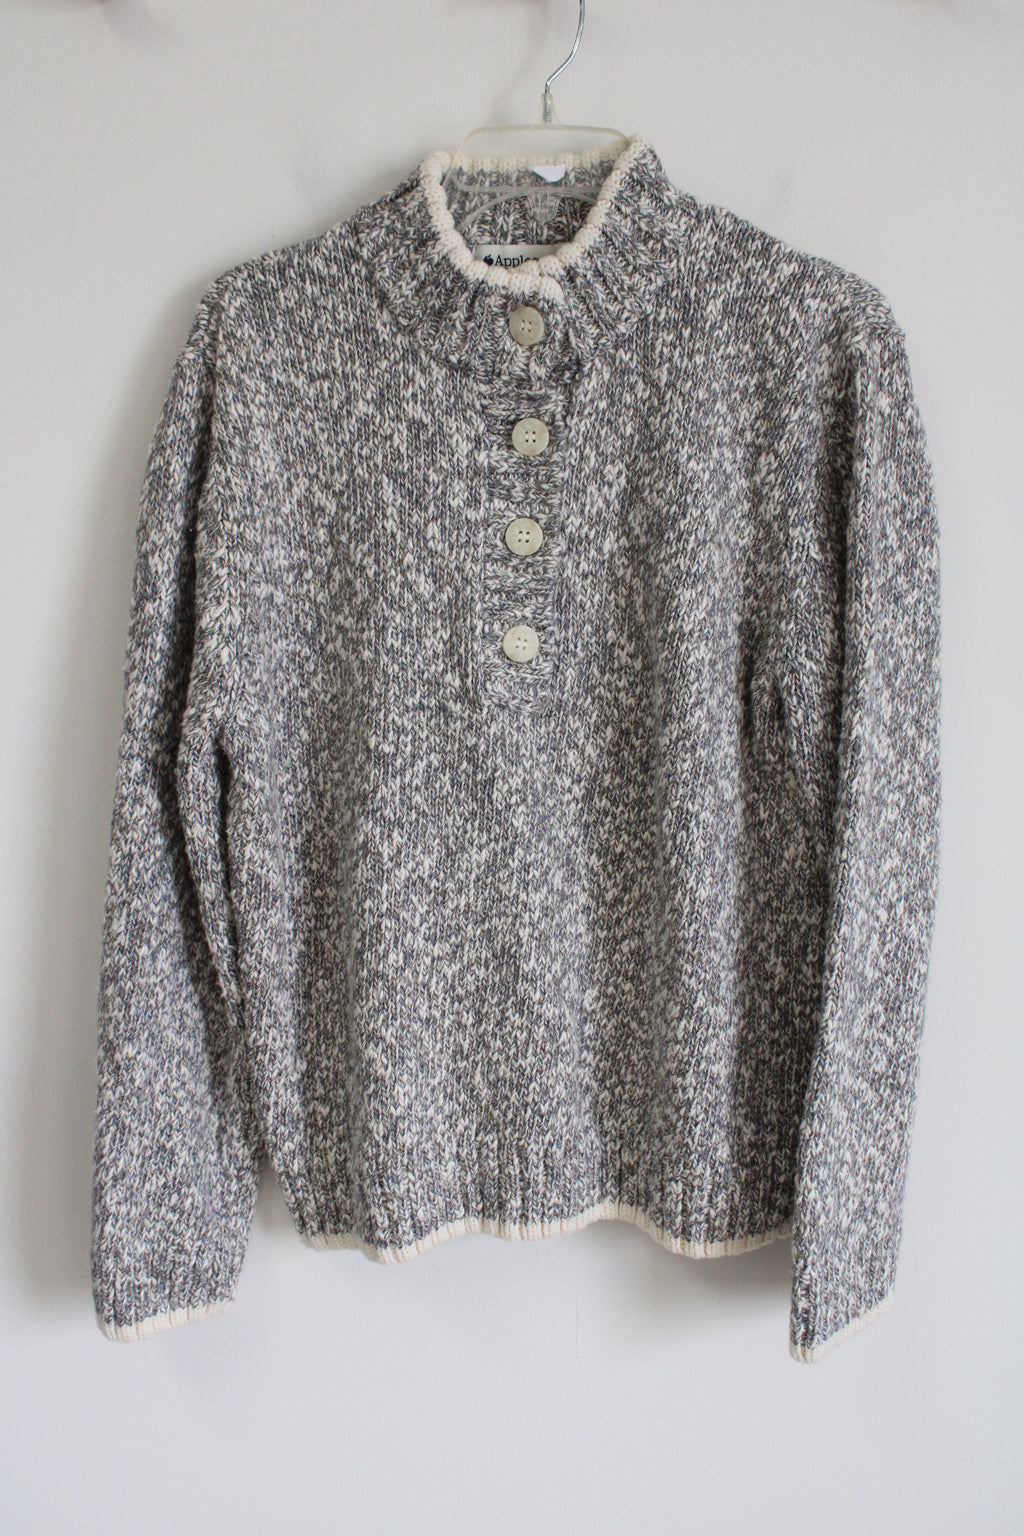 NEW Appleseed's Gray Blue Thick Knit 1/4 Button Sweater | XL